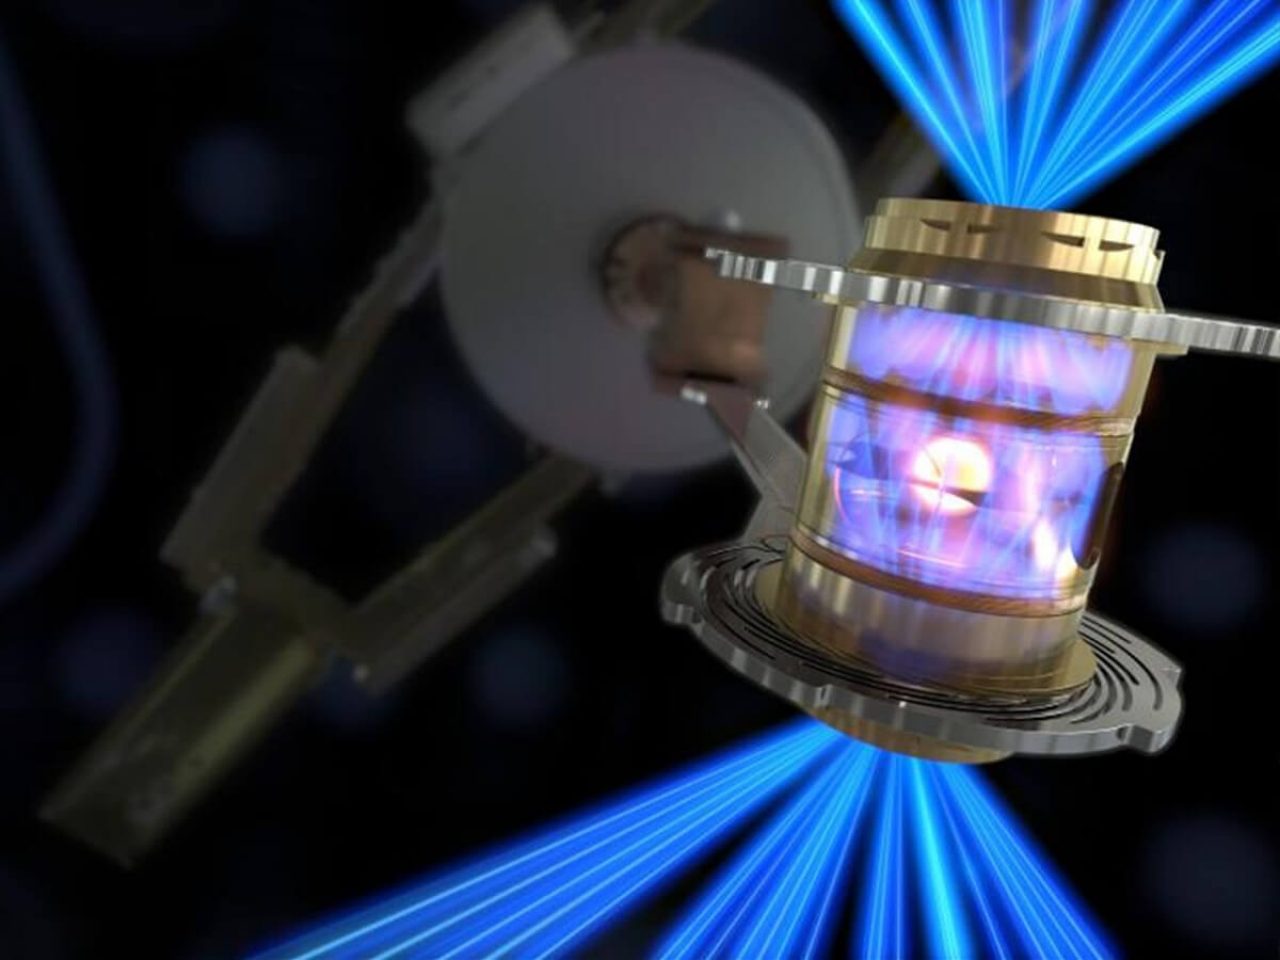 To produce fusion ignition, the LLNL’s National Ignition Facility uses laser energy to create temperatures and pressures like those in the cores of stars.